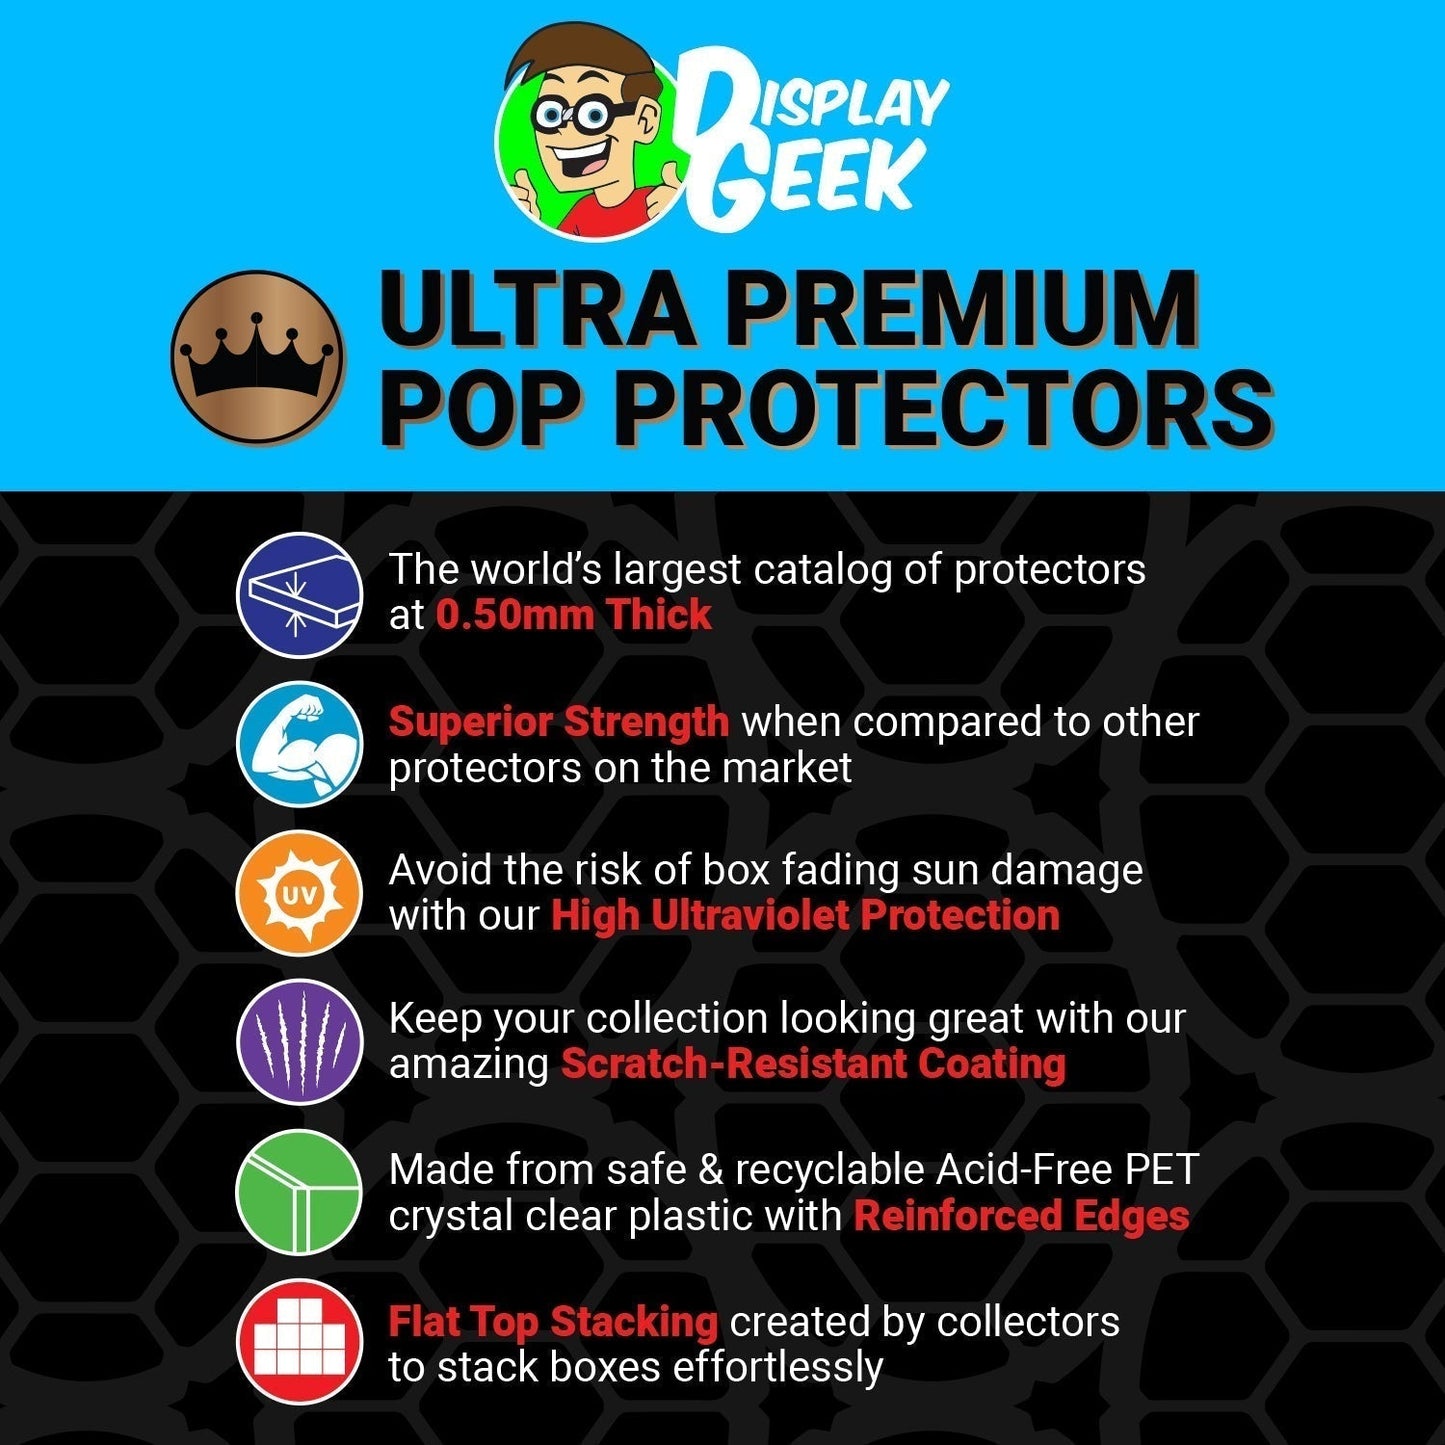 Pop Protector for Beetlejuice FunkO's Cereal Box - PPG Pop Protector Guide Search Created by Display Geek